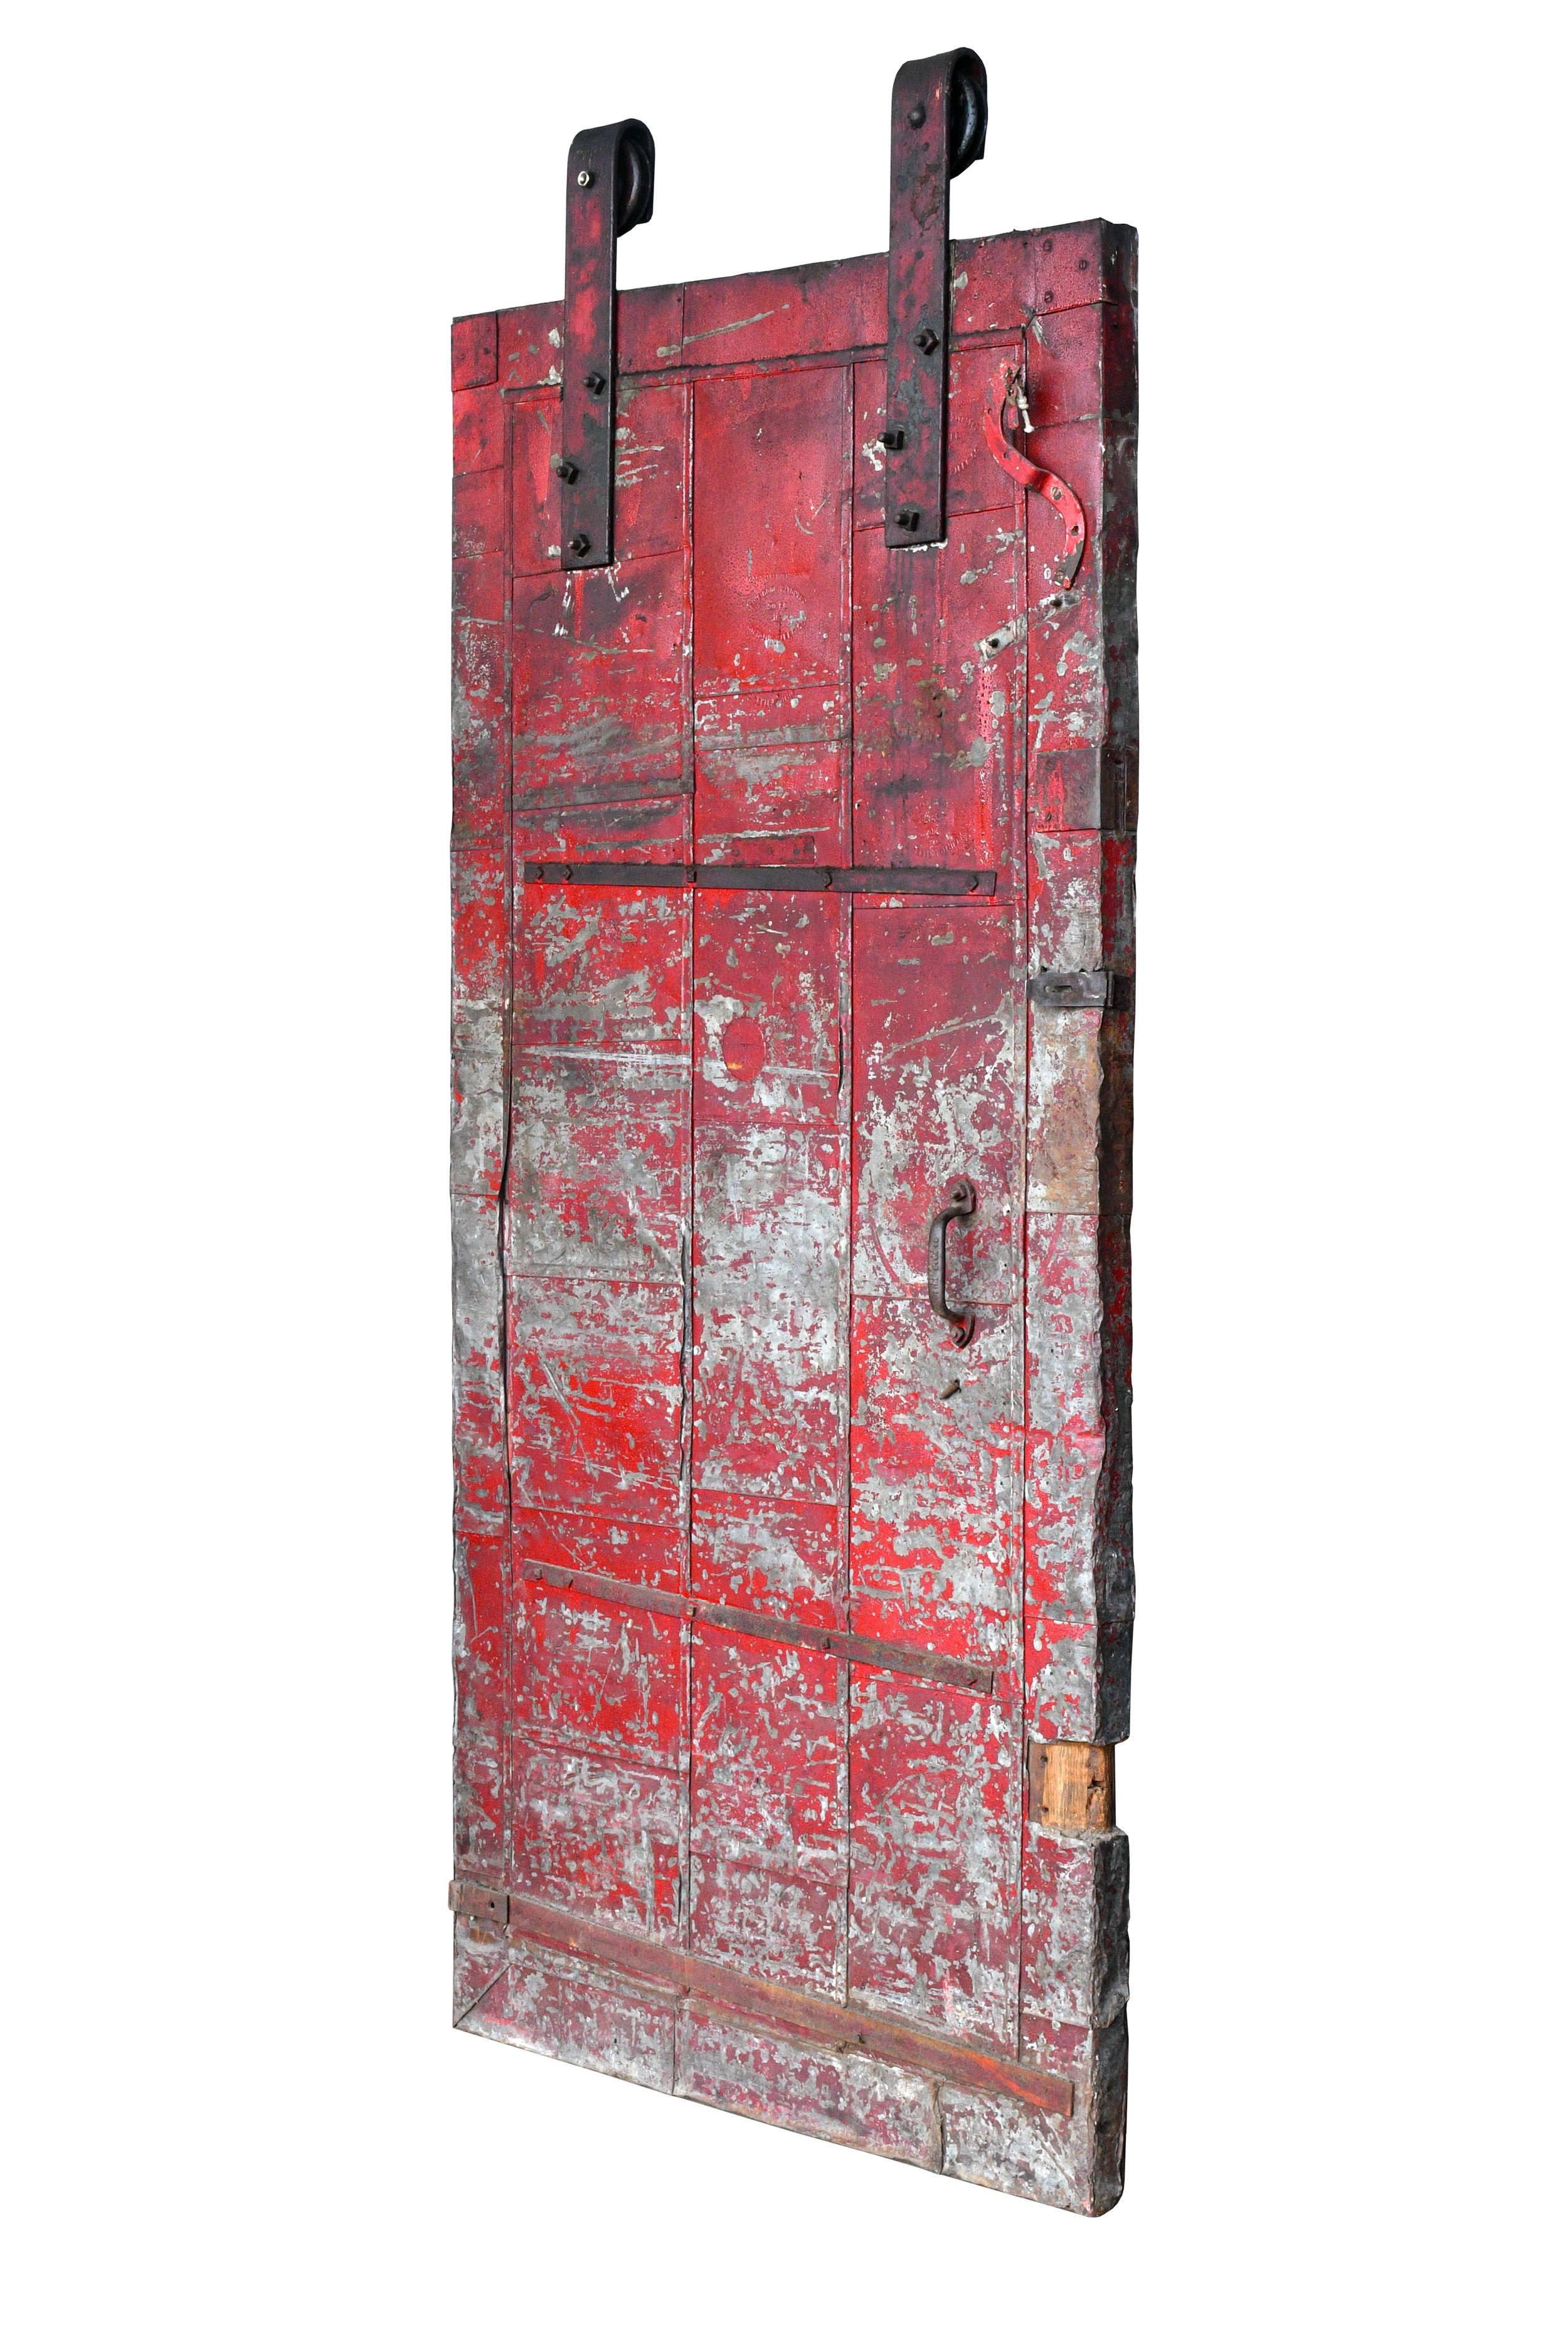 Heavy duty rolling steel fire door manufactured by Syracuse Fire Door Company. The red paint is worn off in places, revealing the metal underneath. Perfect for use as an industrial style barn door, it’s sure to grab attention wherever you put